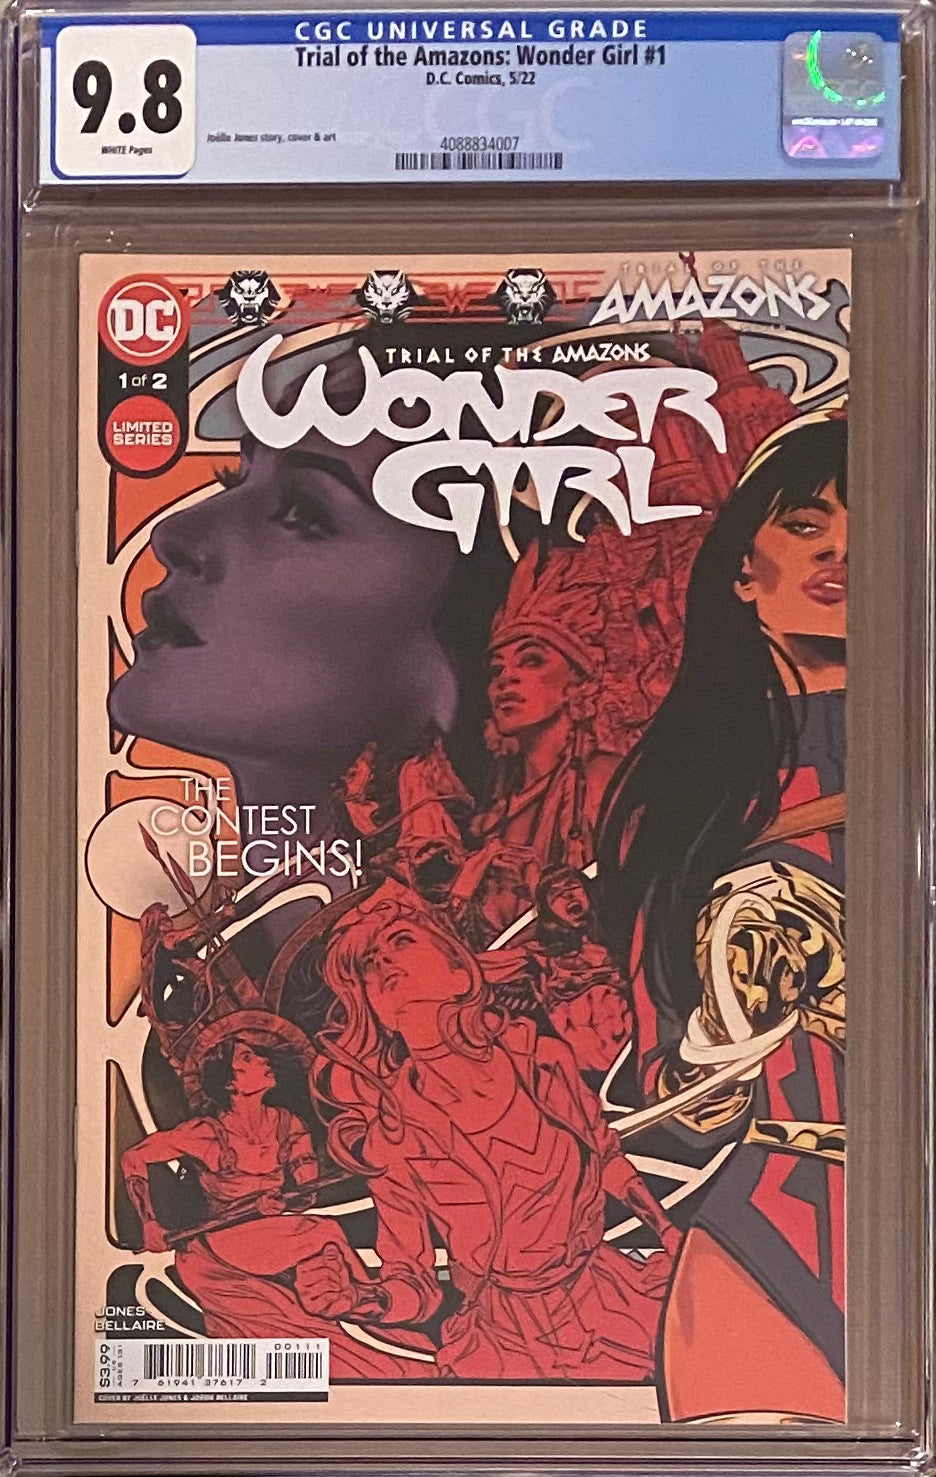 Trial of the Amazons: Wonder Girl #1 CGC 9.8